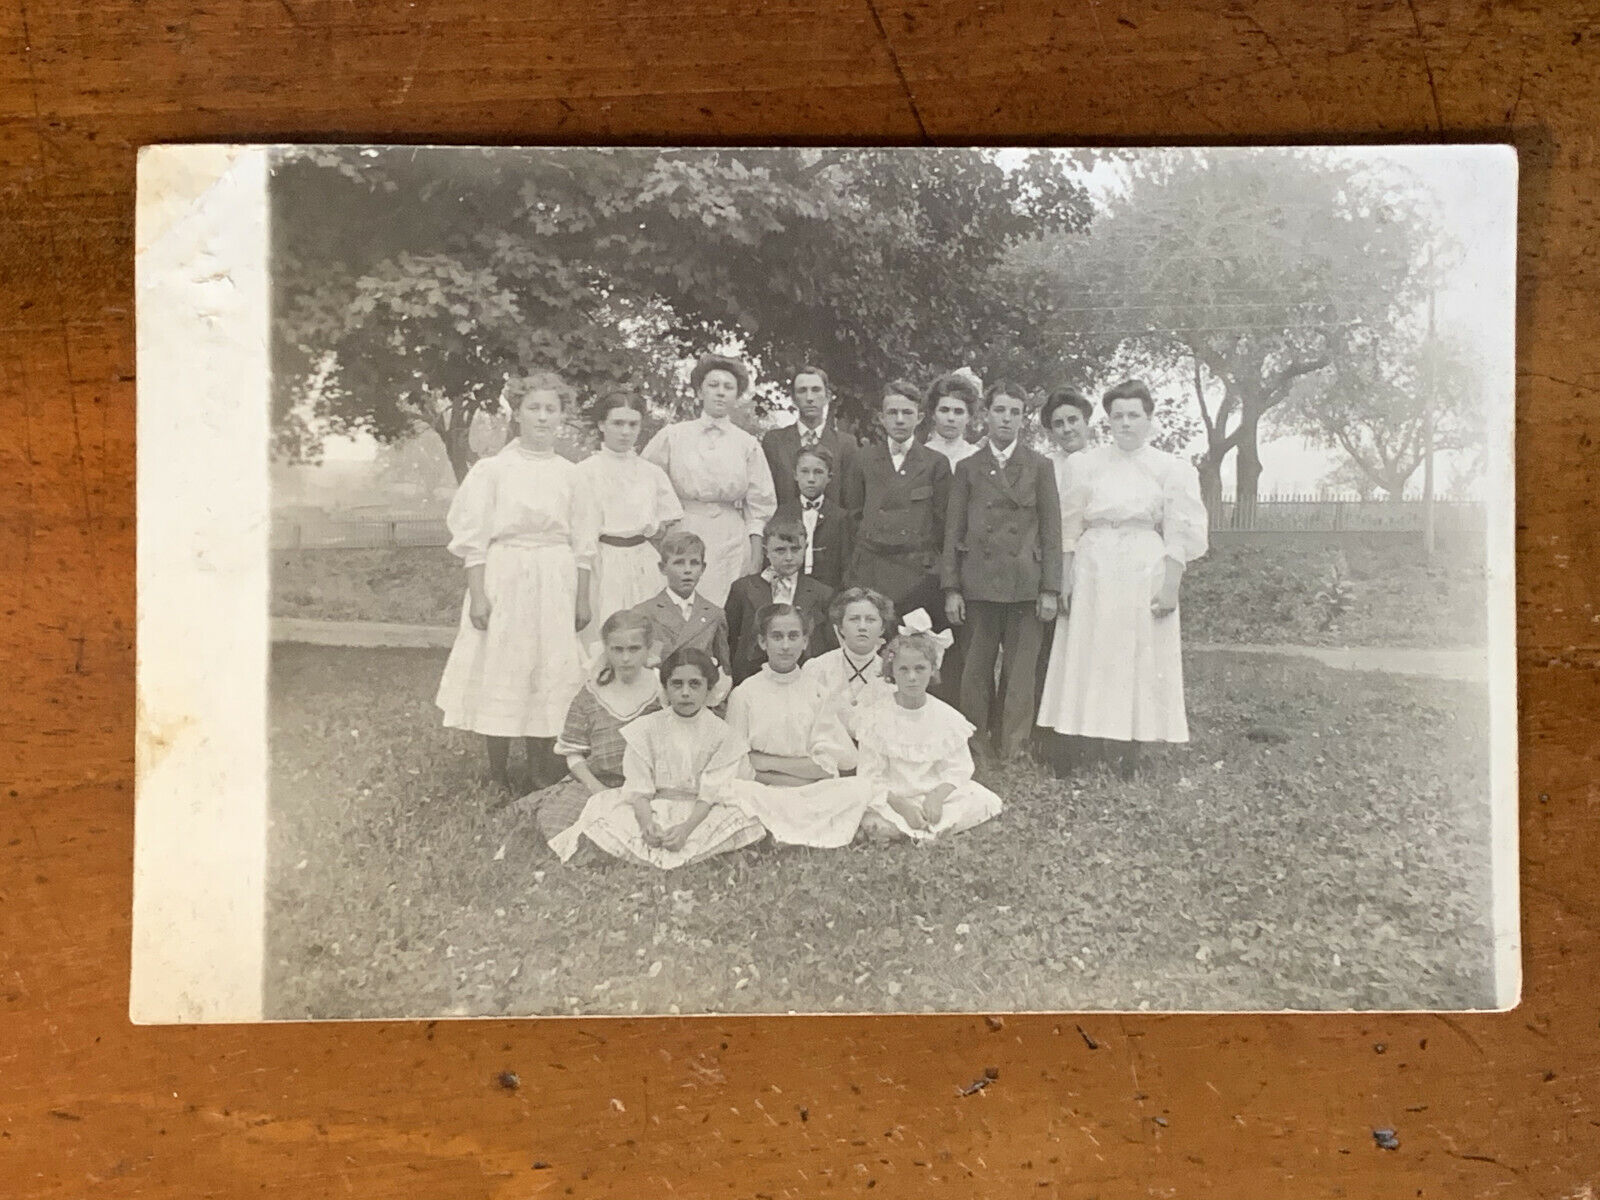 New York, NY, RPPC, People on Lawn, Postmarked Fort Plain 1909